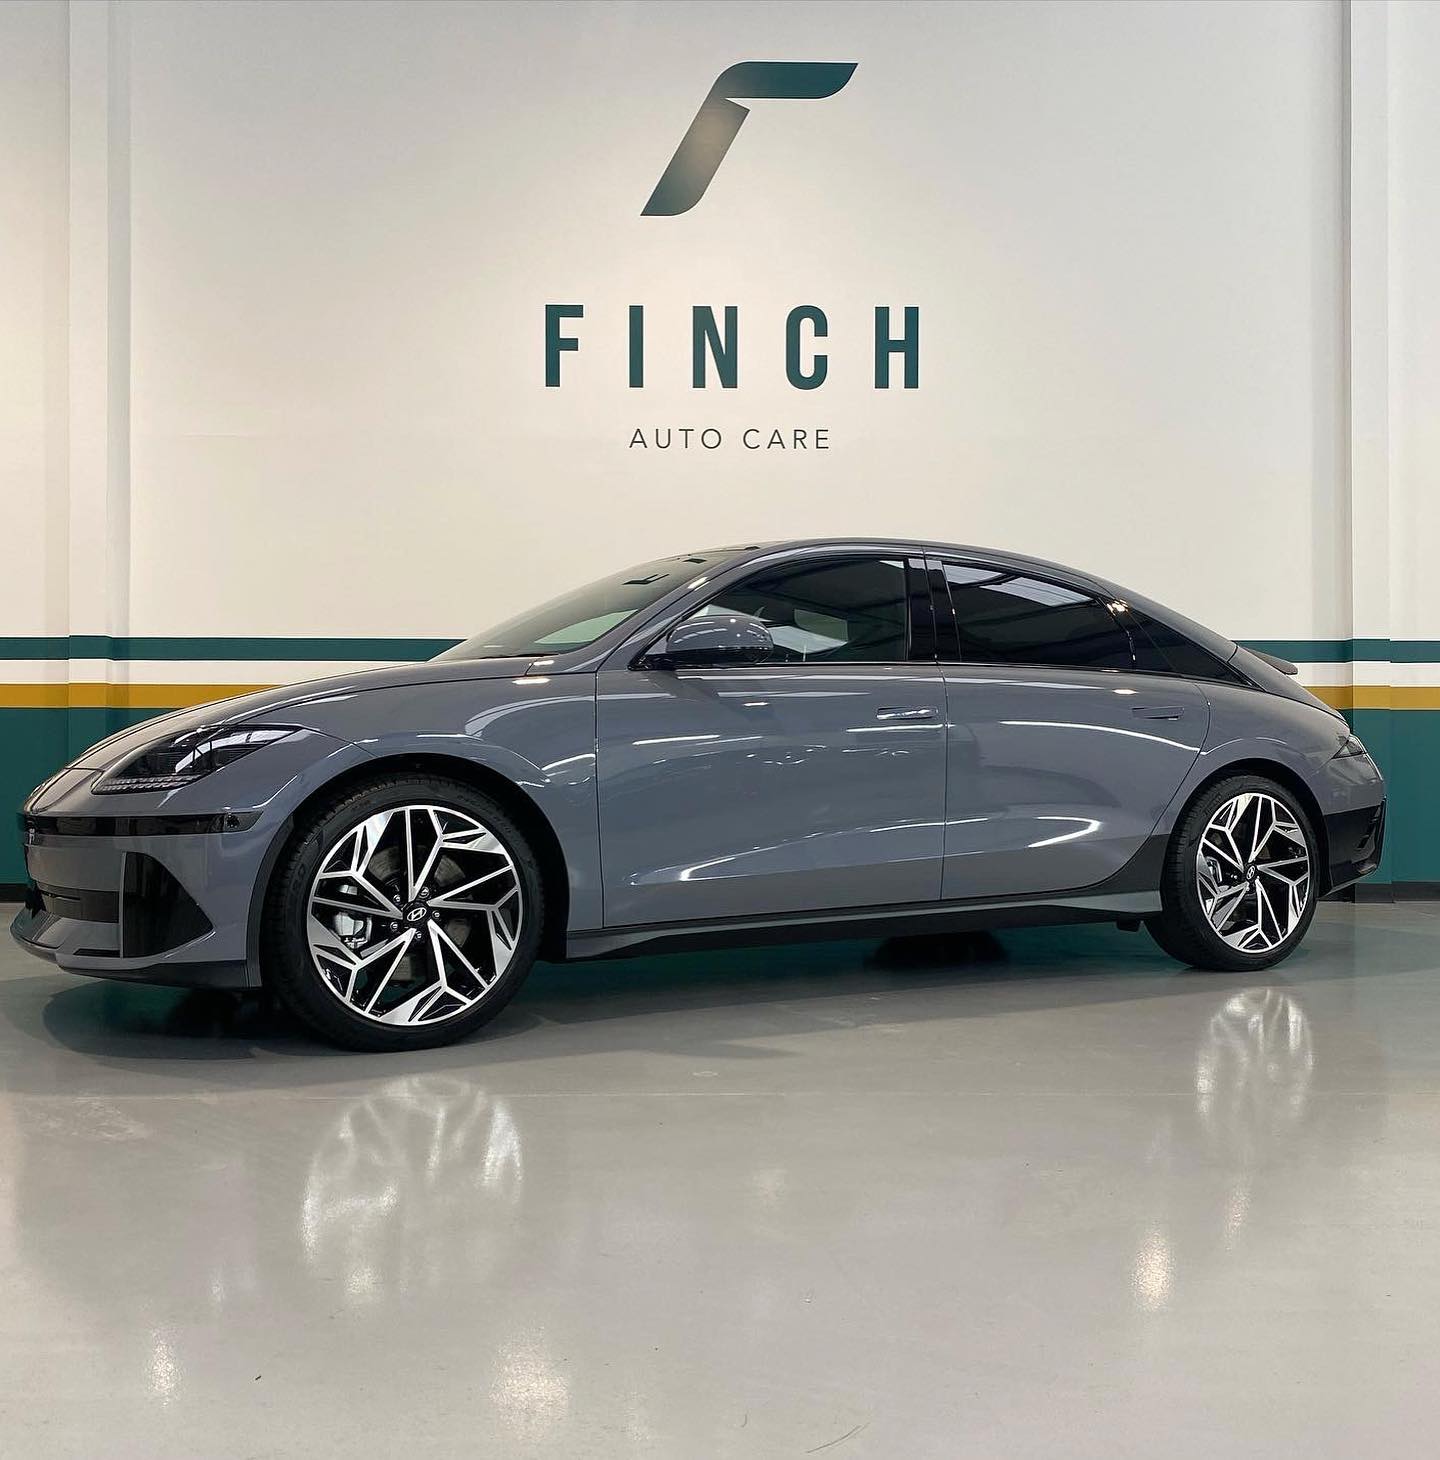 A sleek electric vehicle displayed in a showroom with finch auto care branding in the background.